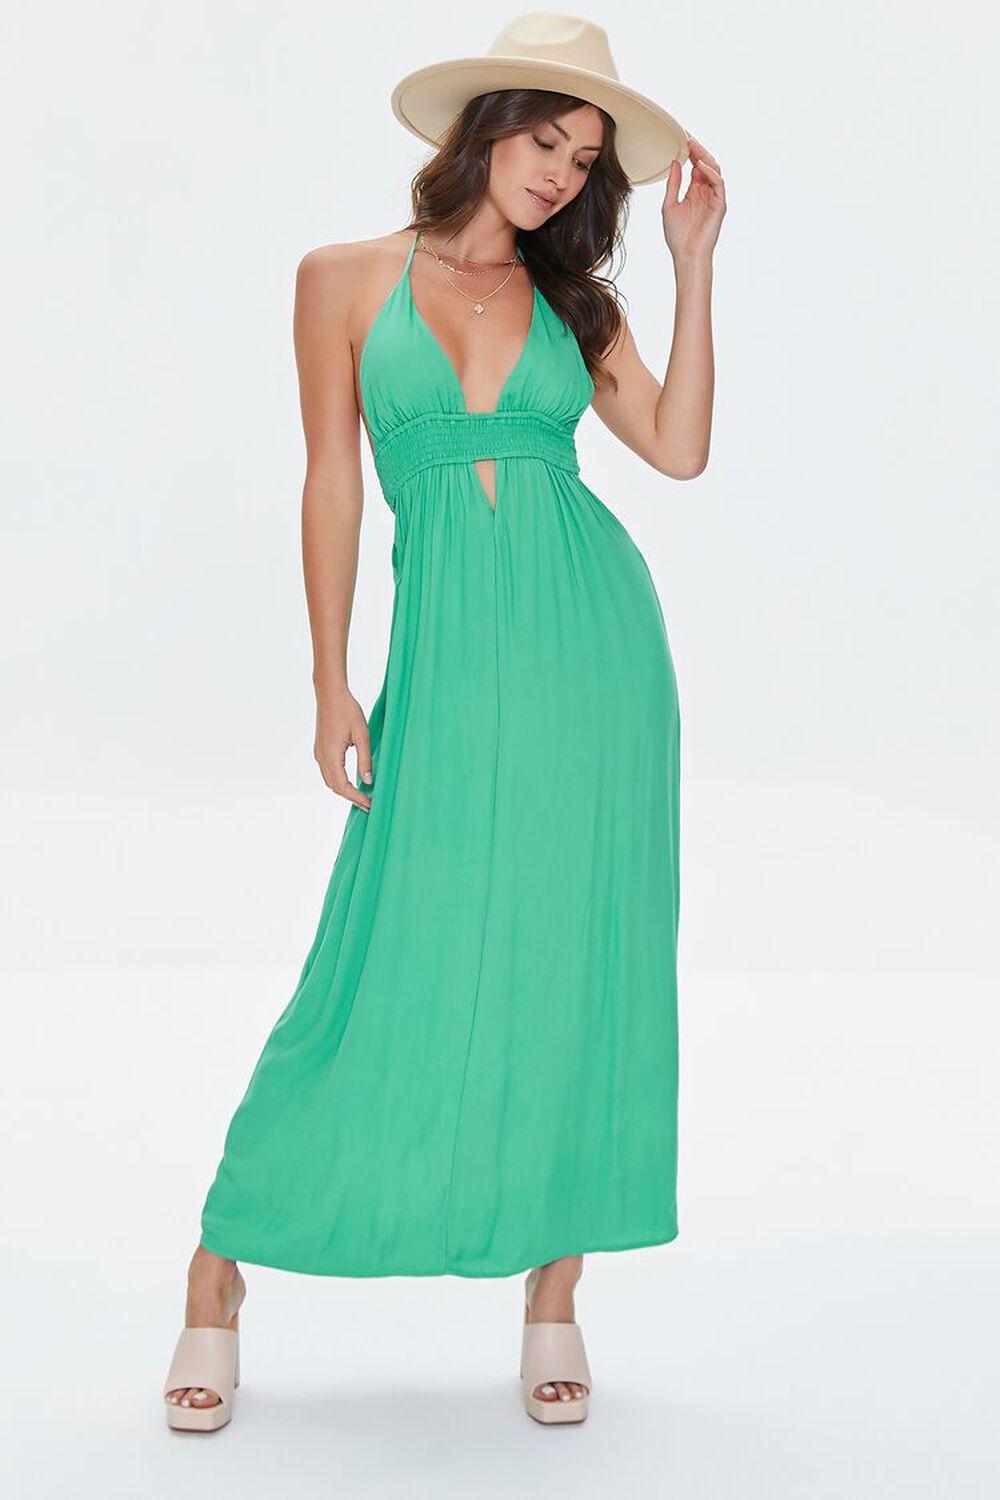 MEADOW Cutout Plunging Halter Maxi Dress, image 1